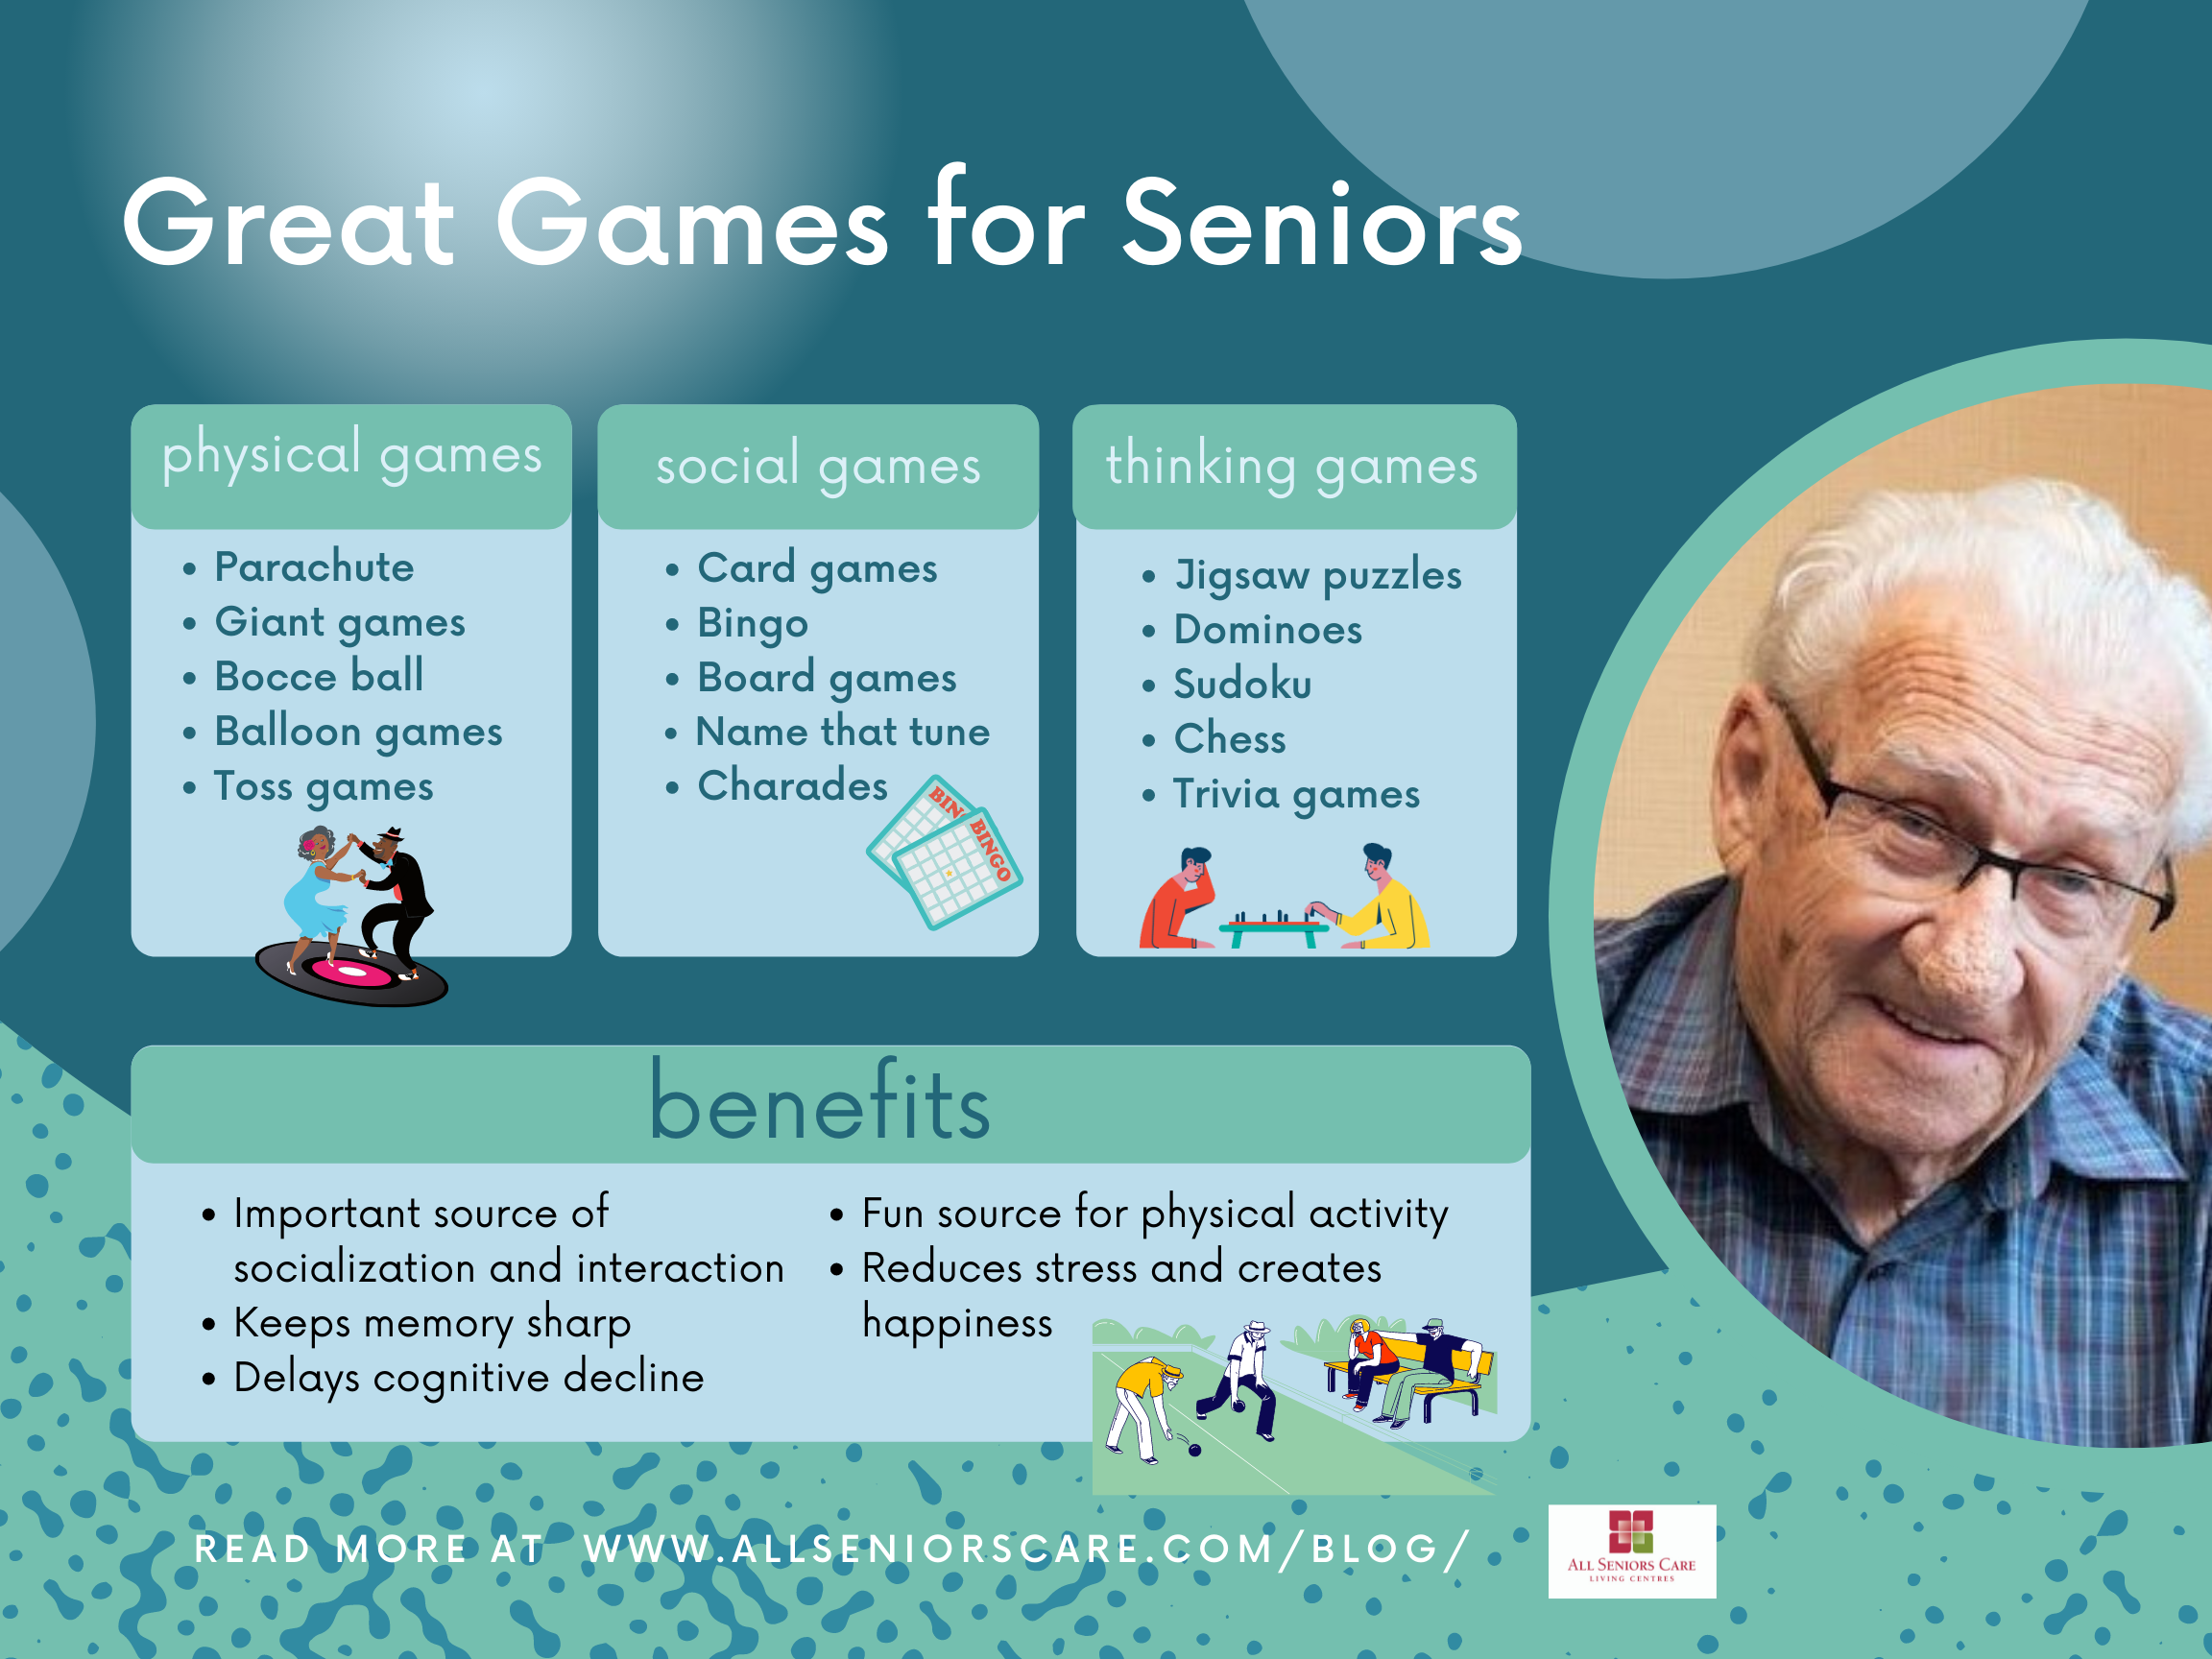 Benefits of Playing Games for Seniors